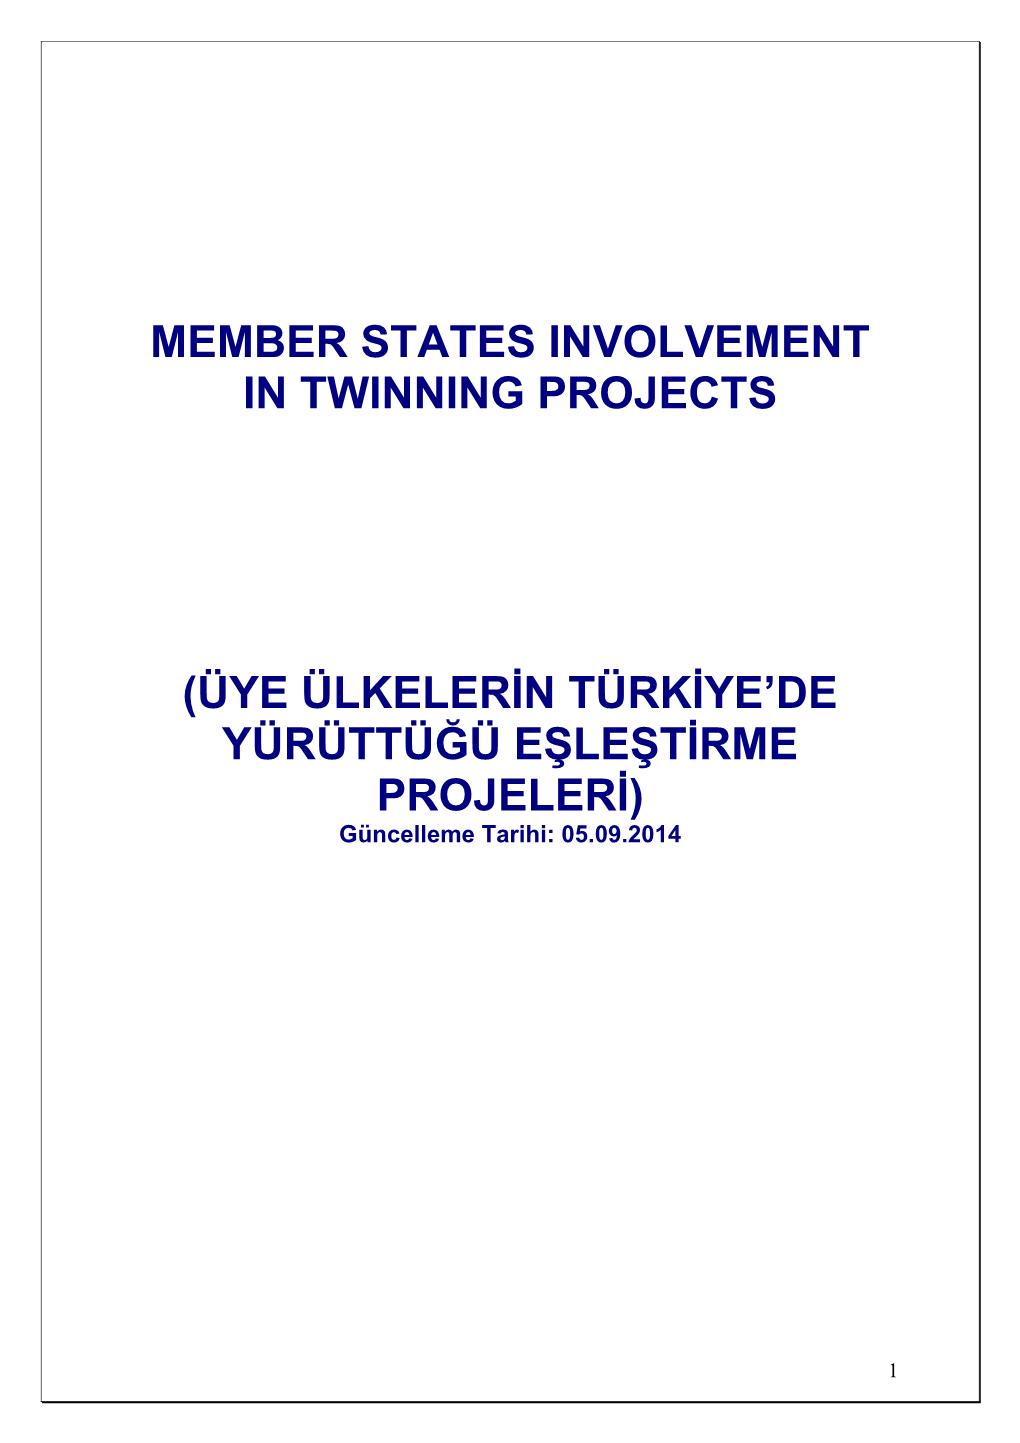 Member States Involvement in Twinning Projects